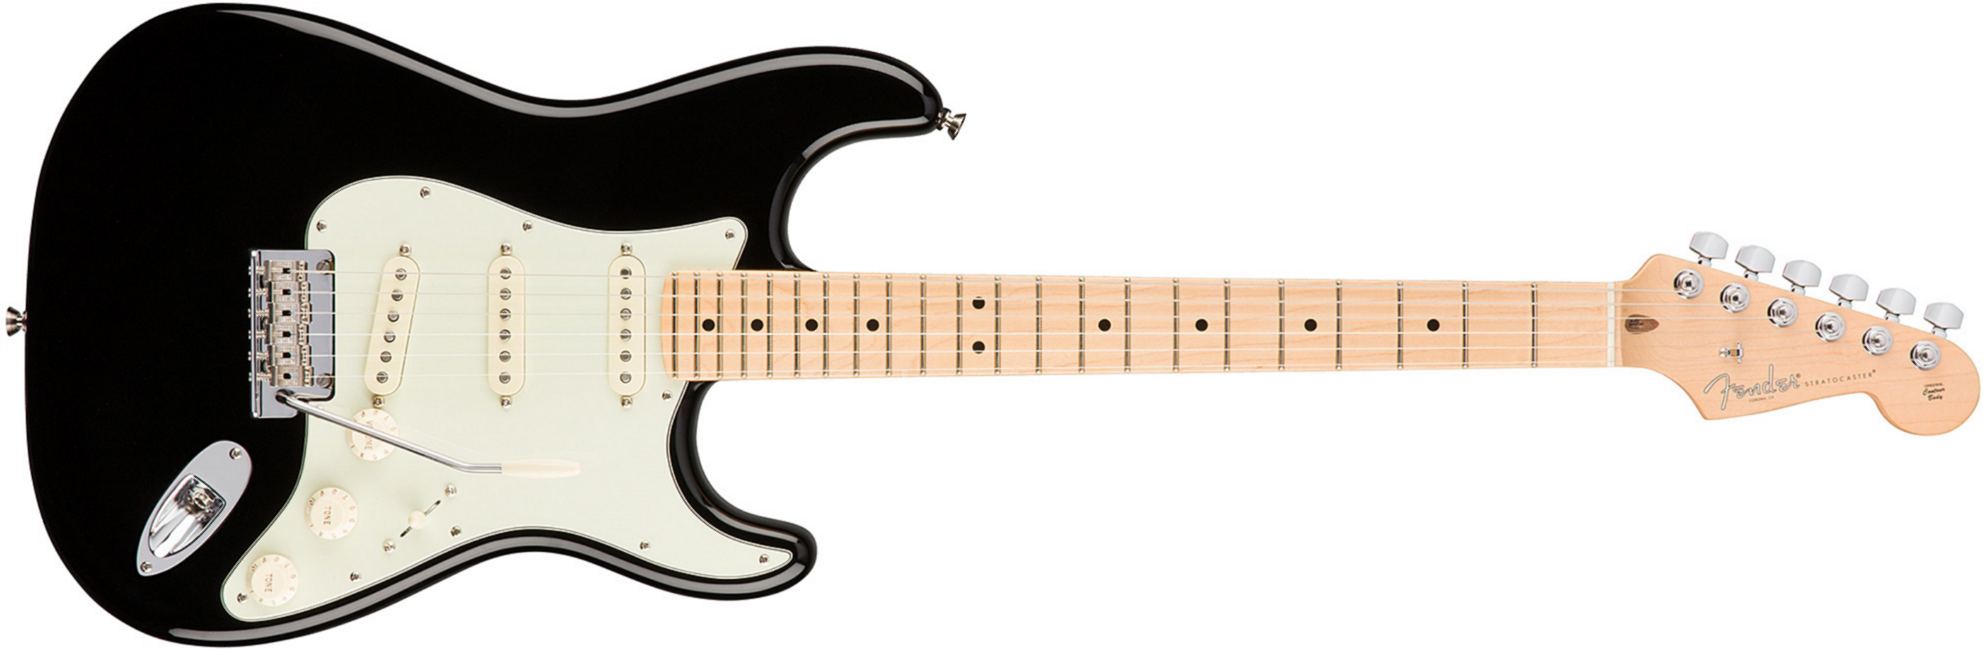 Fender Strat American Professional 2017 3s Usa Mn - Black - Str shape electric guitar - Main picture